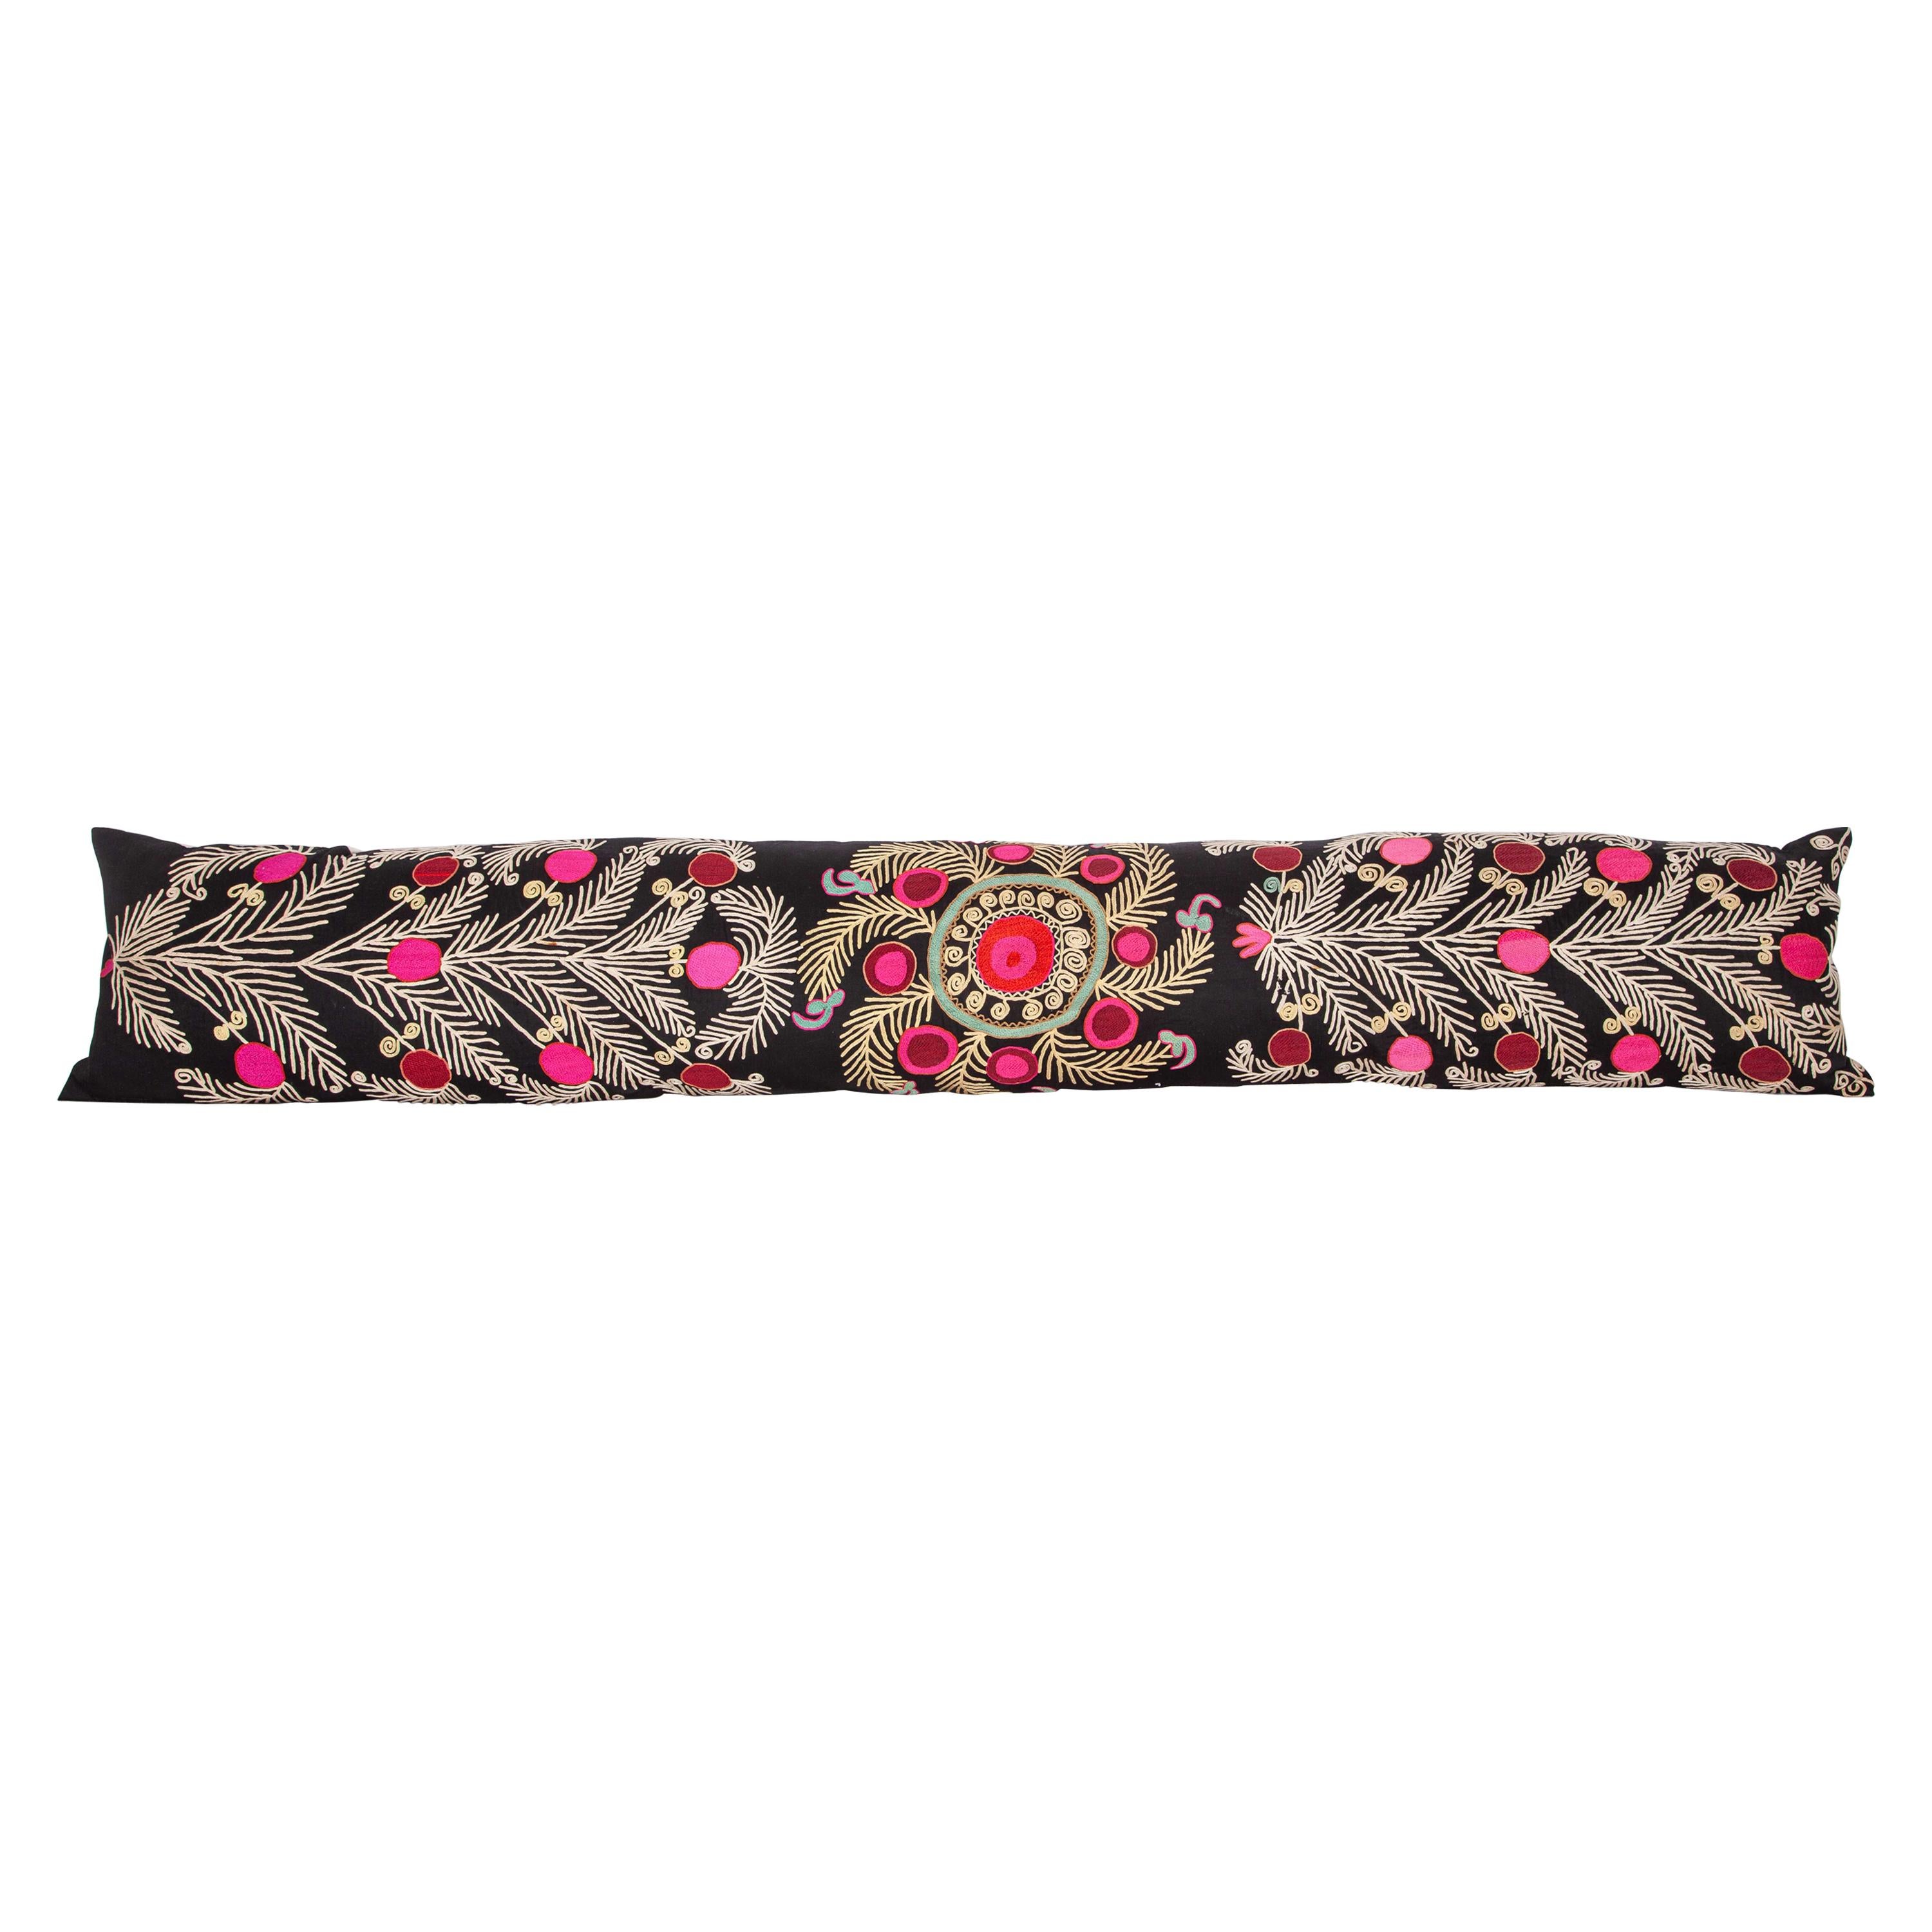 Super Long Lumbar Pillow Case Made from a Vintage Suzani